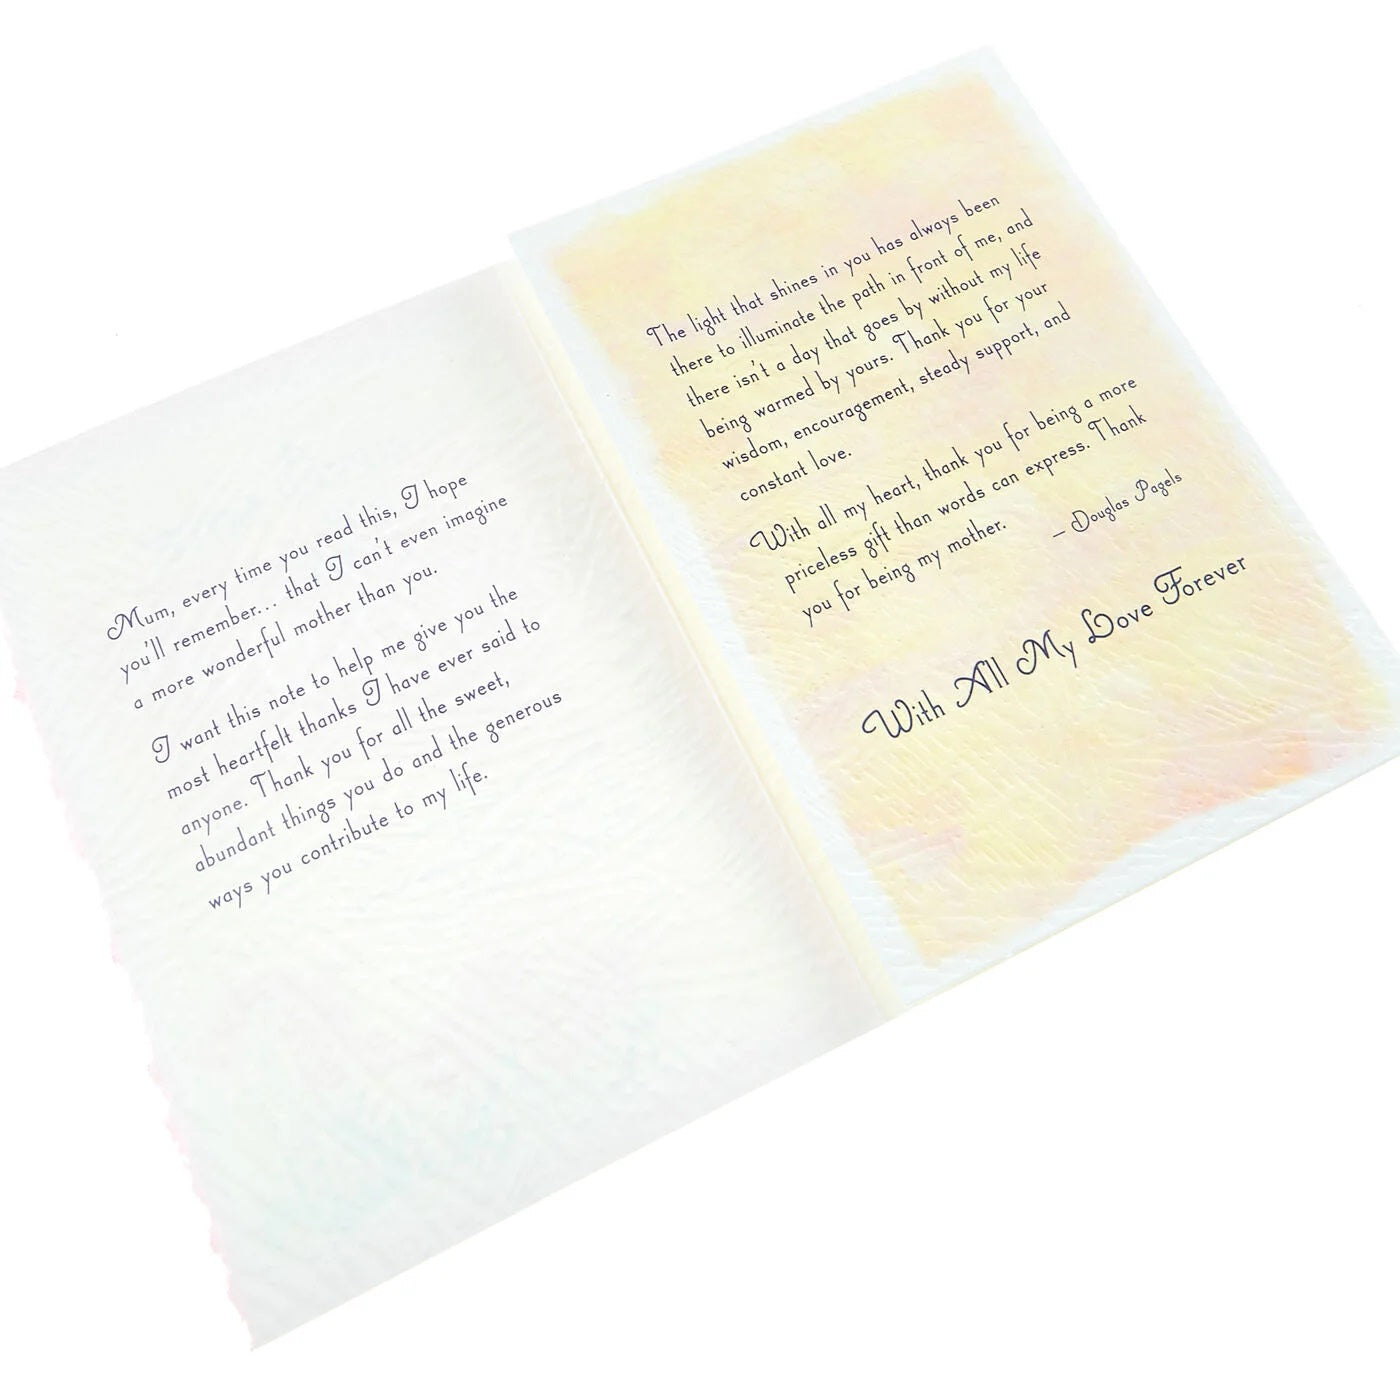 A Forever Note For My Mother Card - Blue Mountain Arts